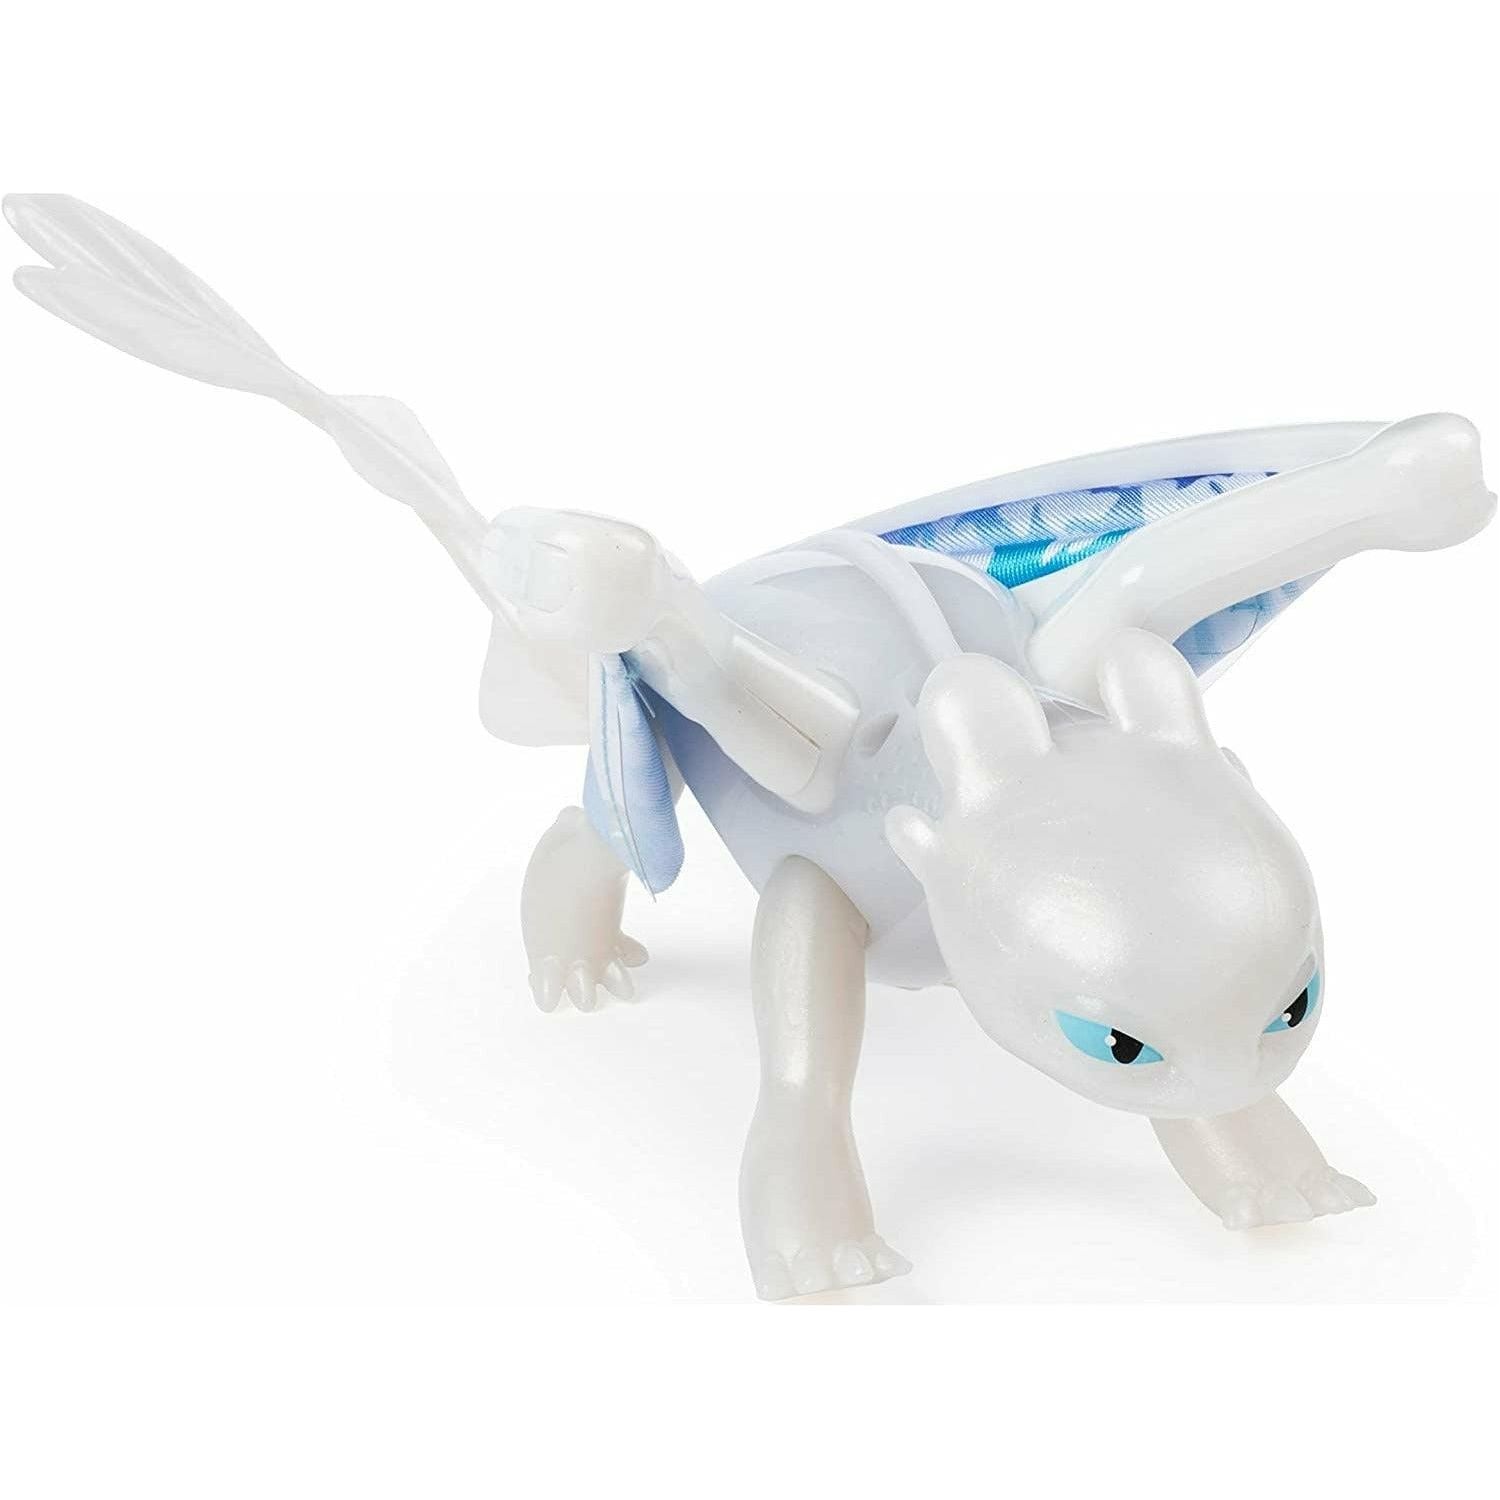 Dreamworks Dragons Lightfury Deluxe Dragon With Lights and Sounds How to train your dragon - BumbleToys - 5-7 Years, Action Figures, Boys, Clearance, How to train your dragon, OXE